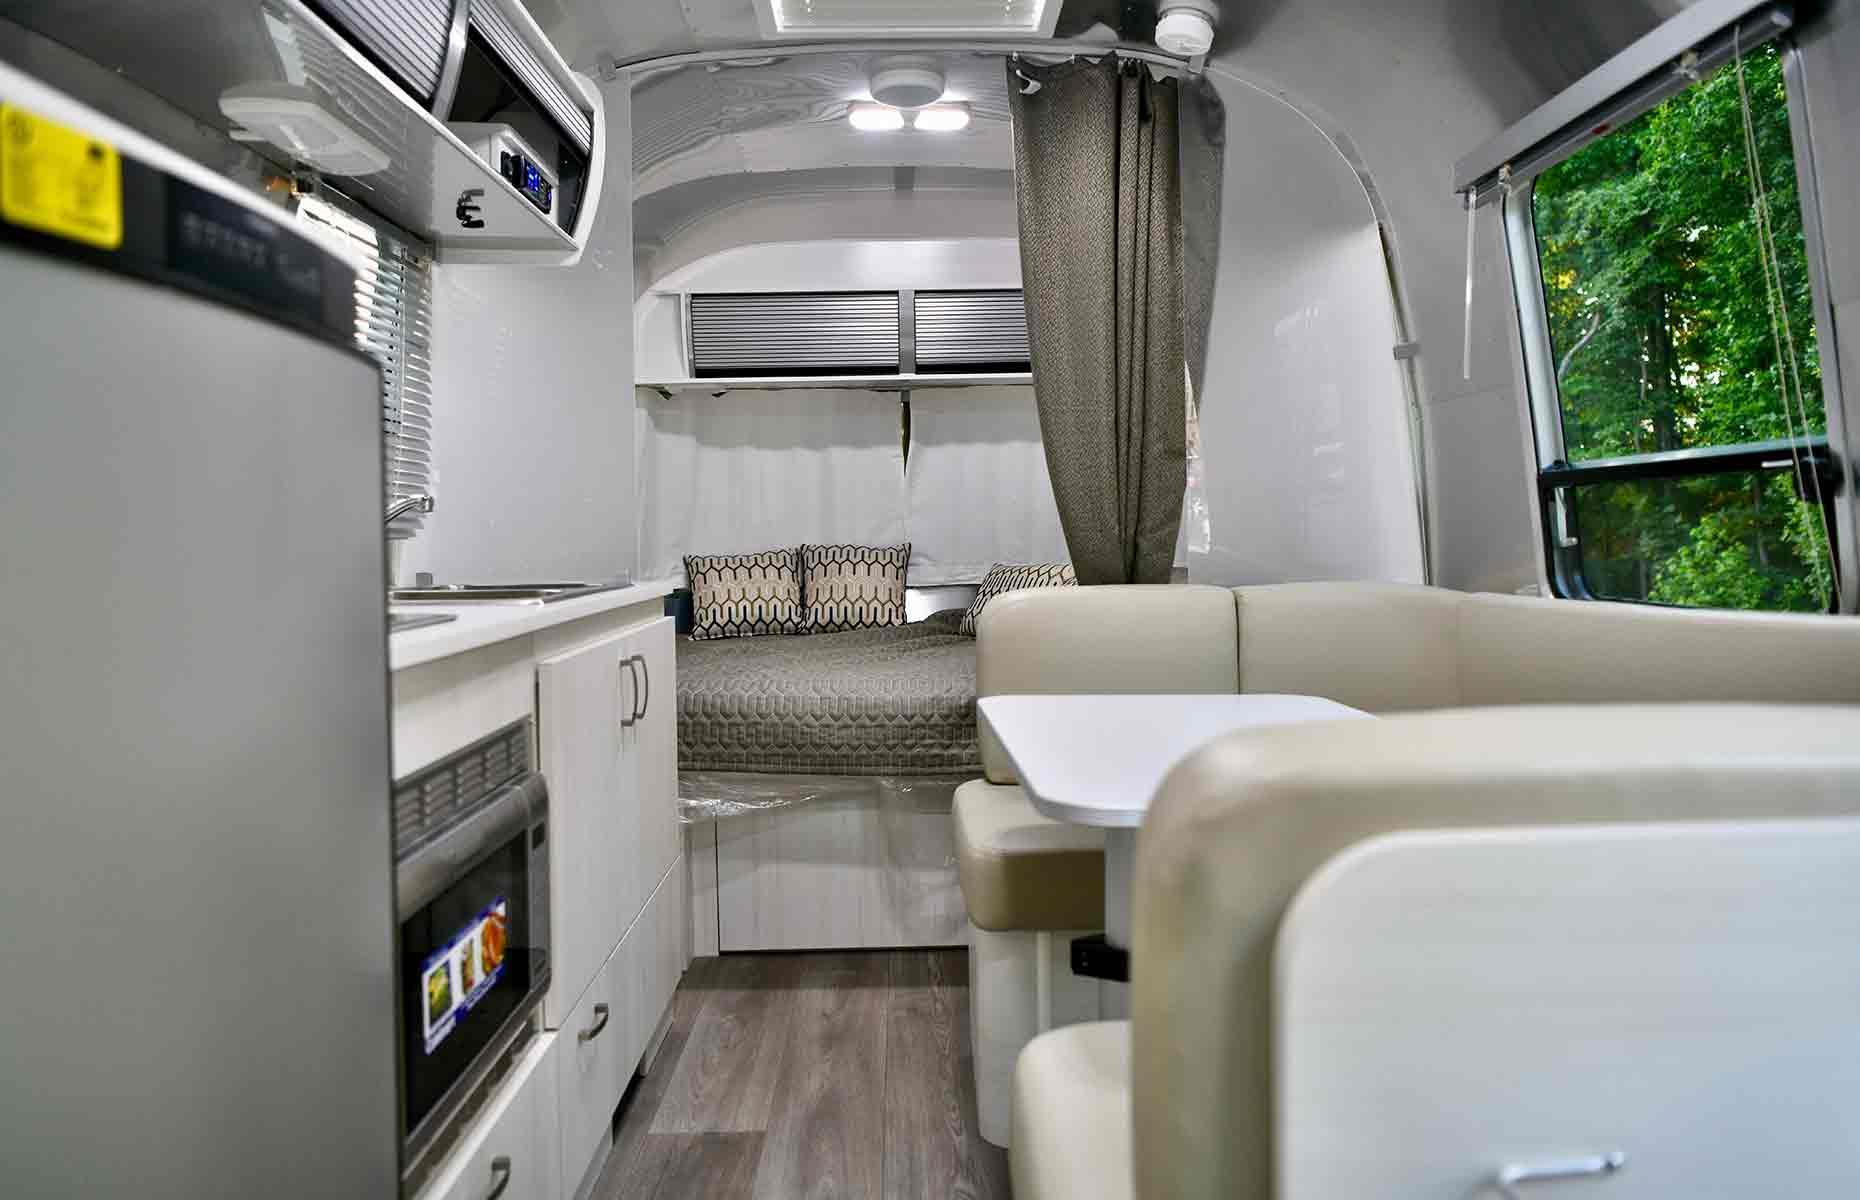 <p>As interest in tiny home living continues to grow, the brand has started to attract a younger, cooler clientele. This army of loyal fans – who like to call themselves "Airstreamers" – share a passion both for the timeless, classic Airstream design and for customizing and renovating their vehicles. </p>  <p>Let's take a look at some of the most amazing Airstream renovations to inspire your next project...</p>